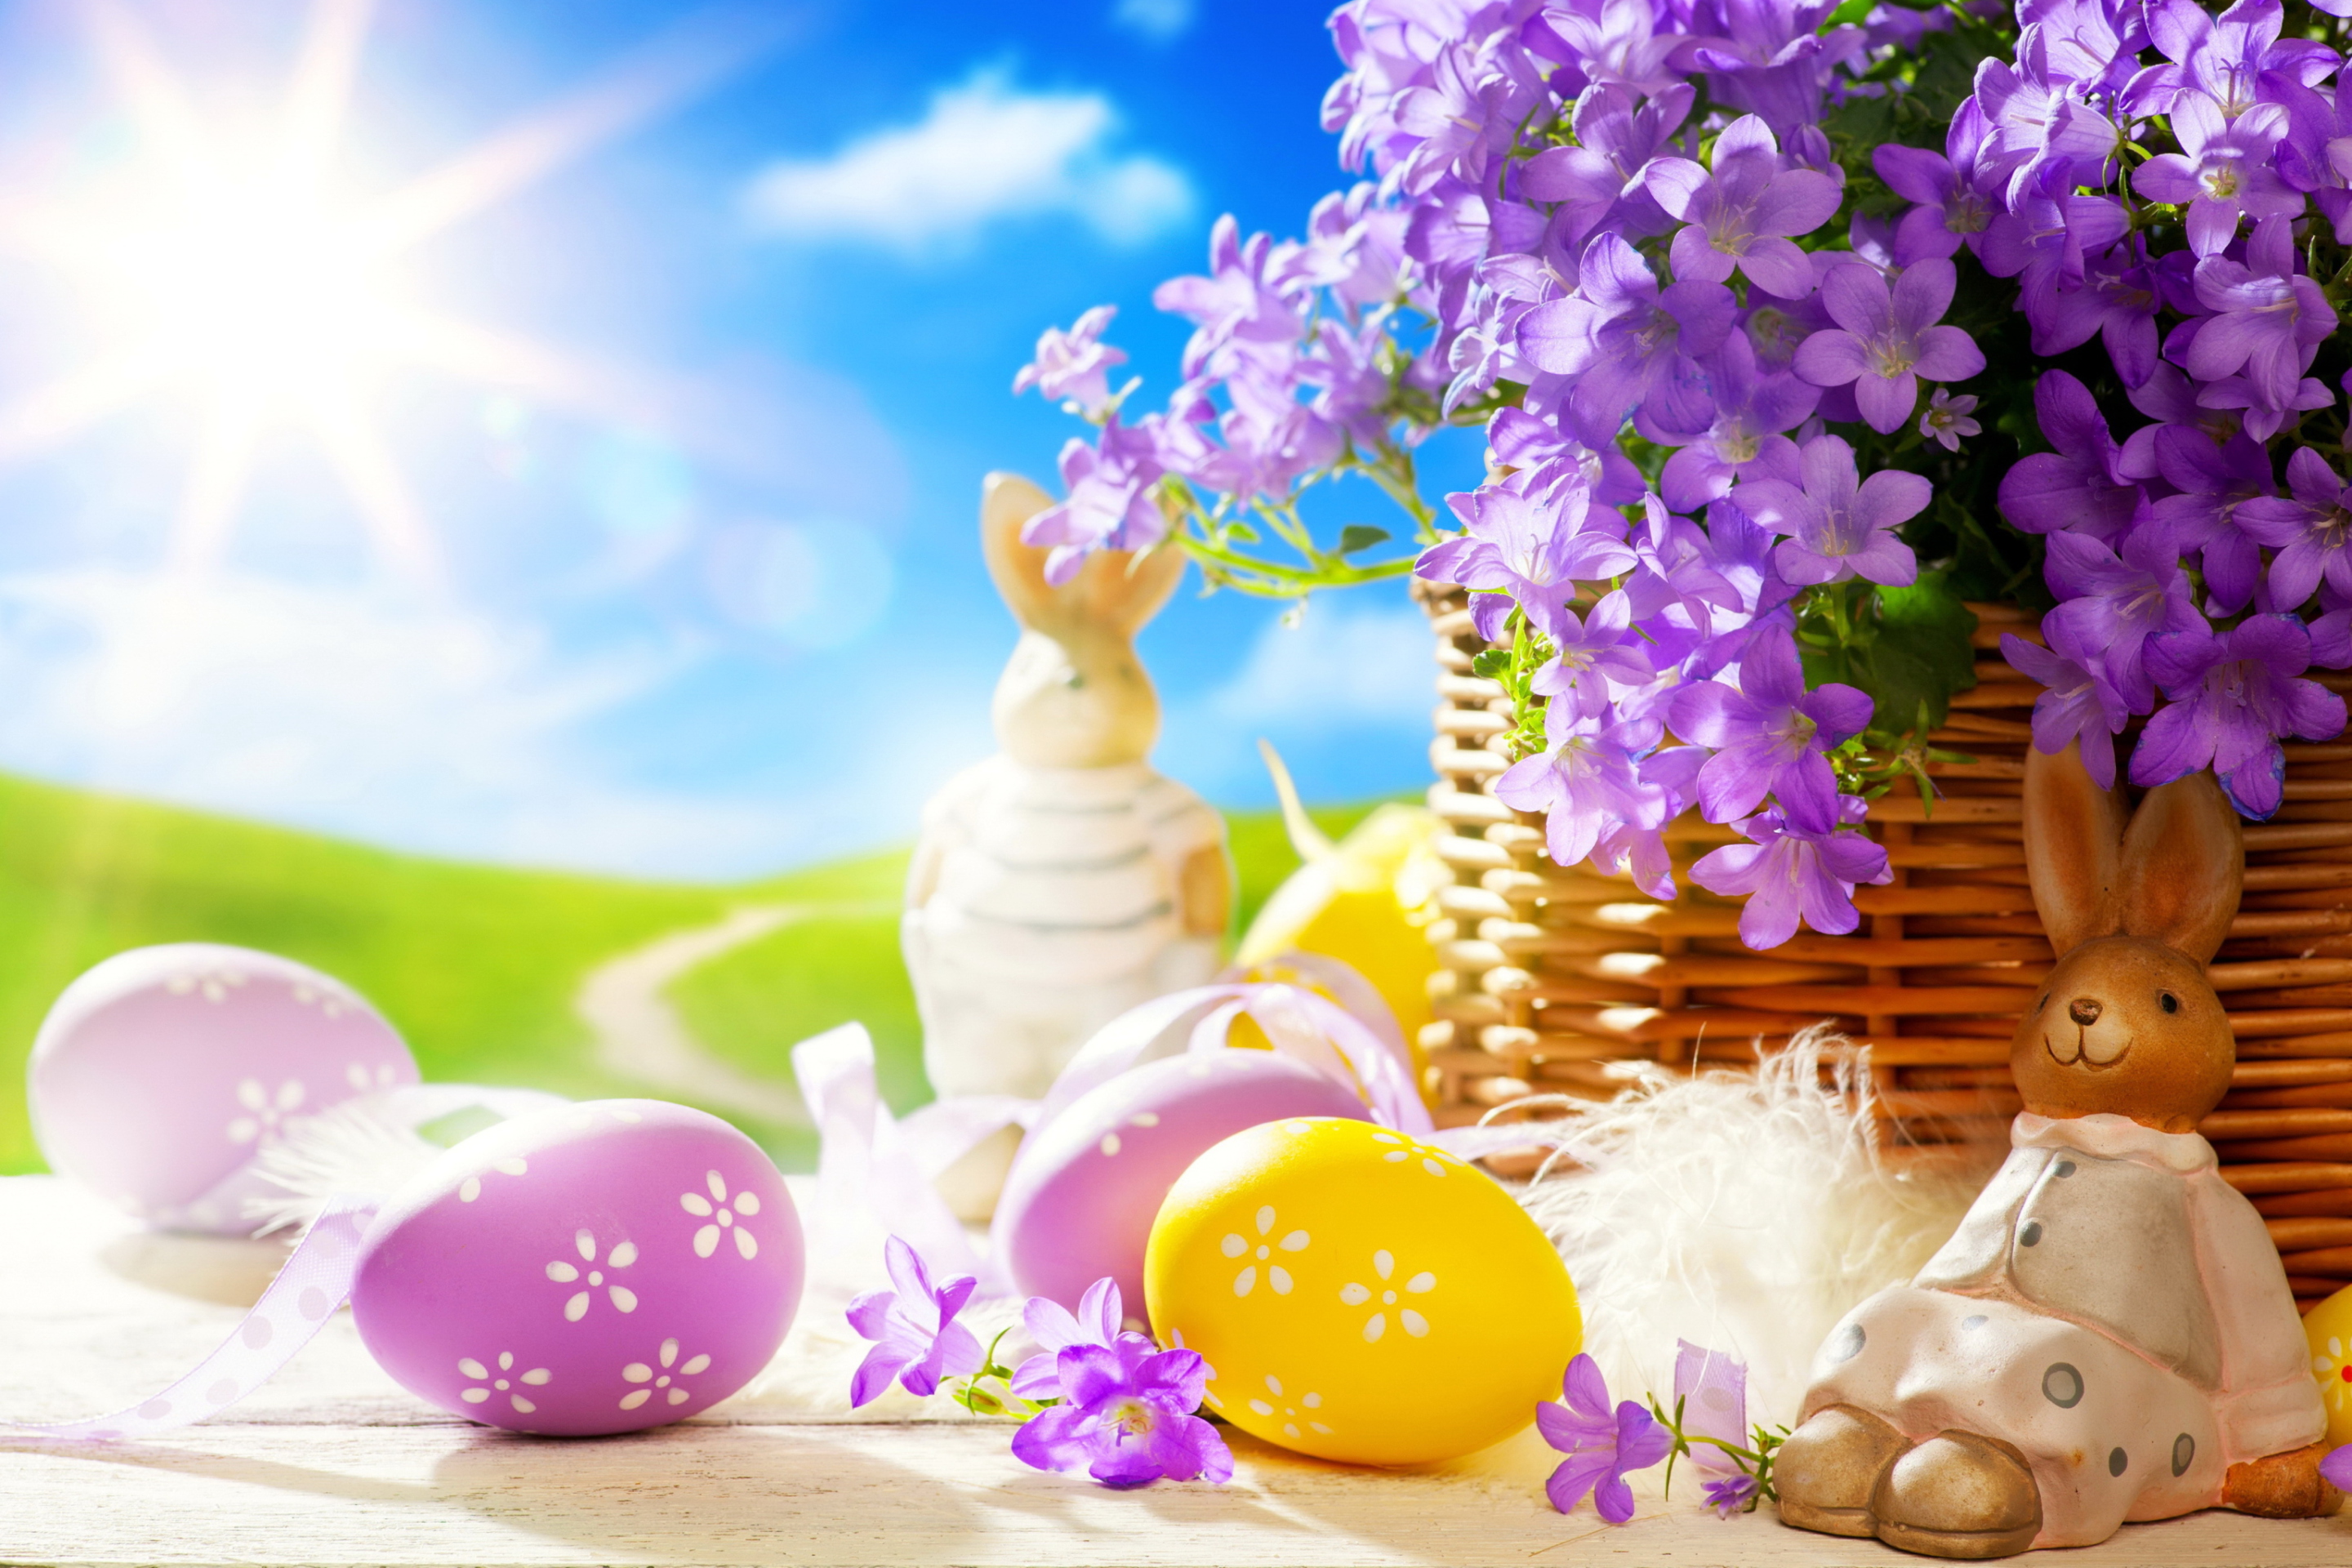 Easter Rabbit And Purple Flowers wallpaper 2880x1920